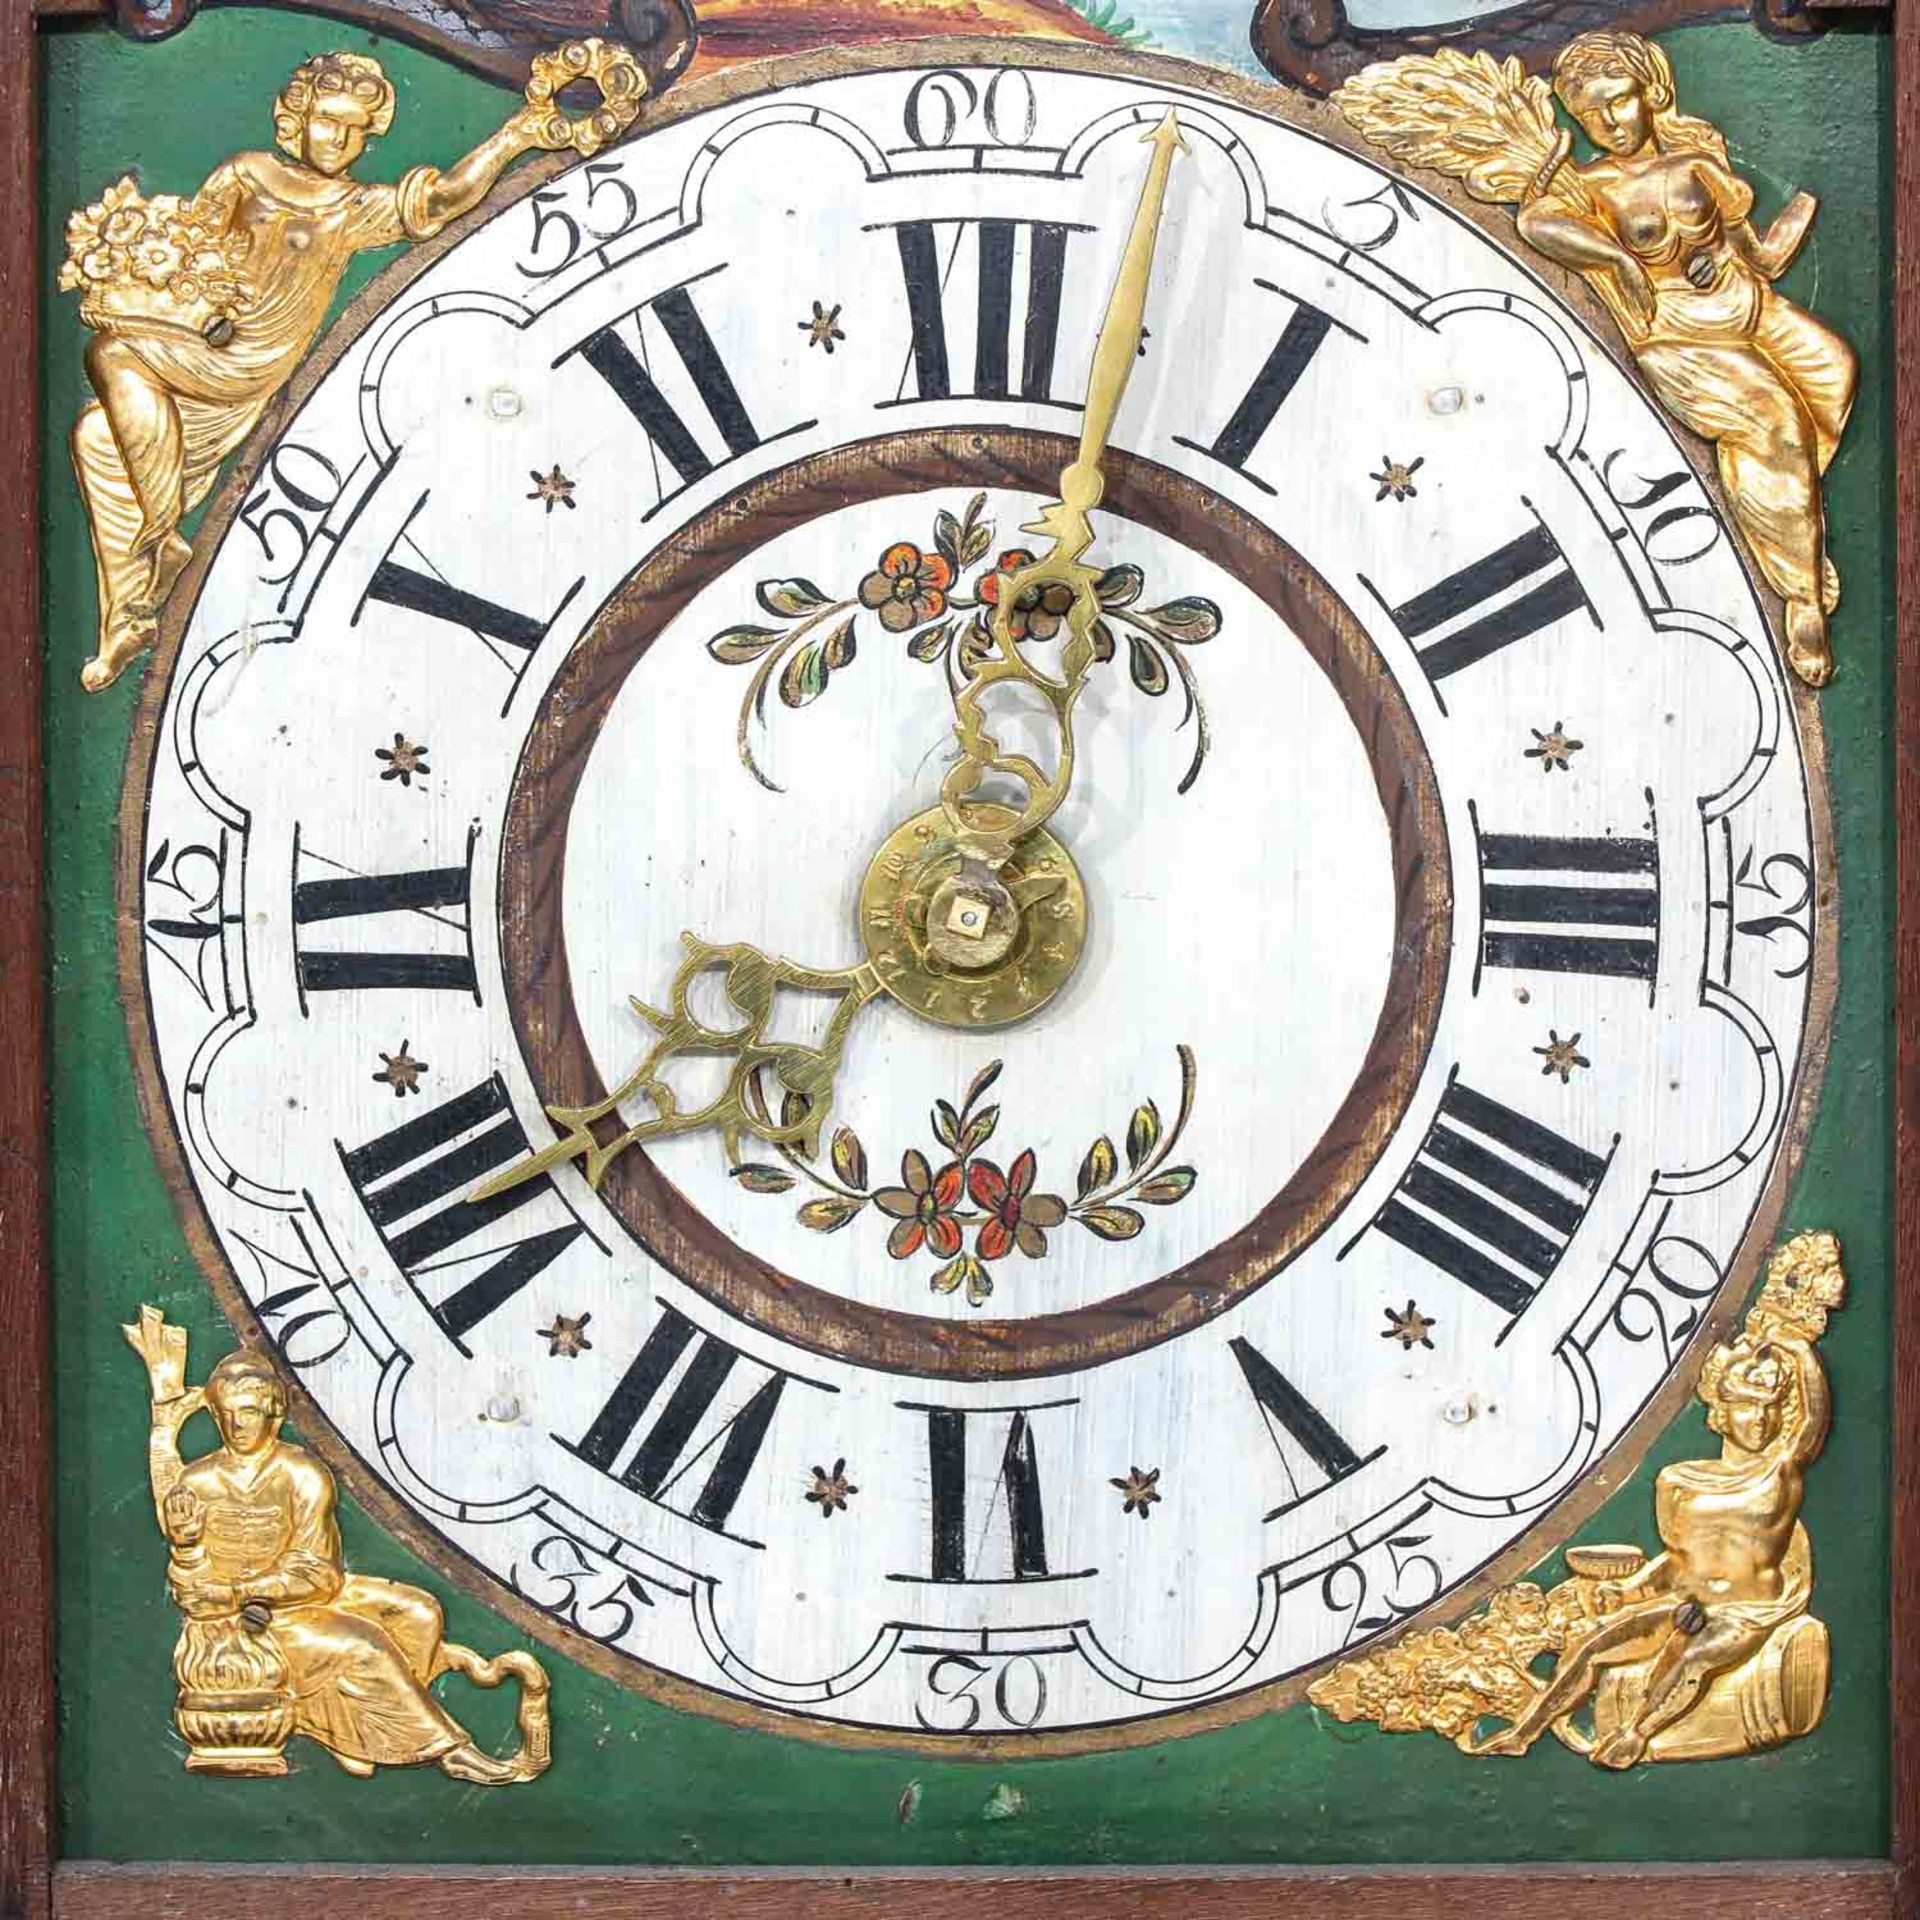 A 19th Century Friesland Wall Clock - Image 4 of 10